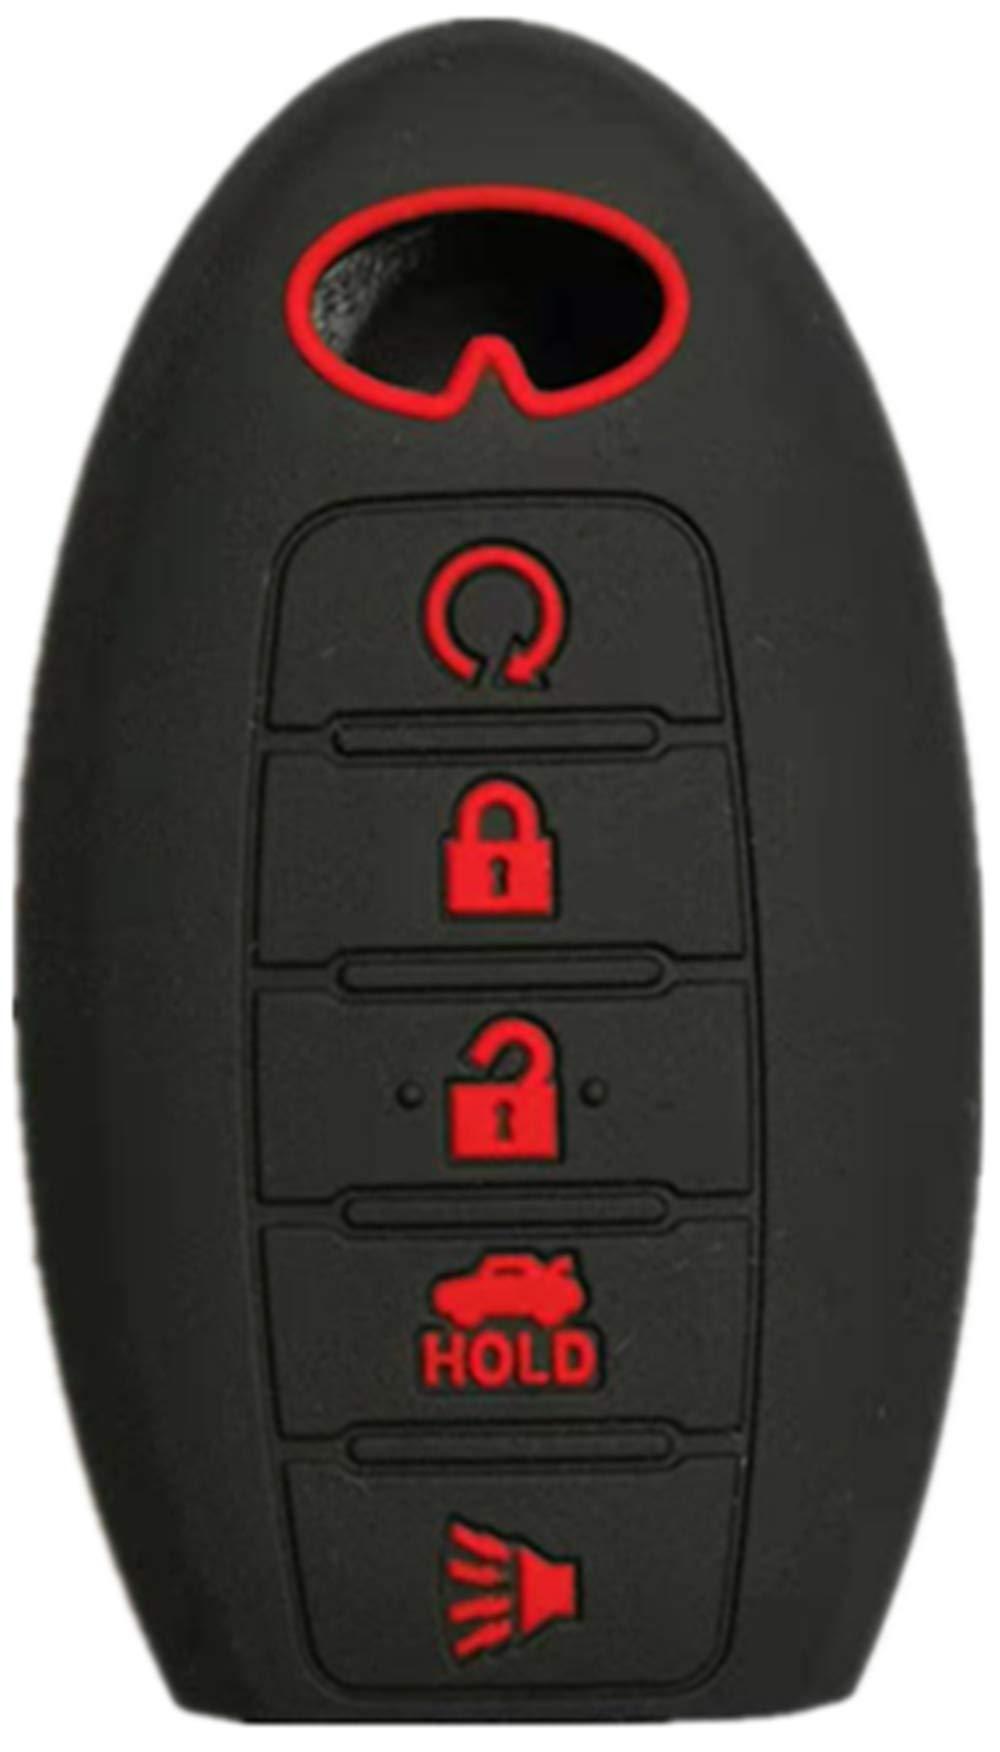  [AUSTRALIA] - RUNZUIE Silicone Keyless Entry Remote Key Fob Cover Case Protector Fit for Infiniti JX35 QX60 QX80 Q50 Black with Red 5 Buttons